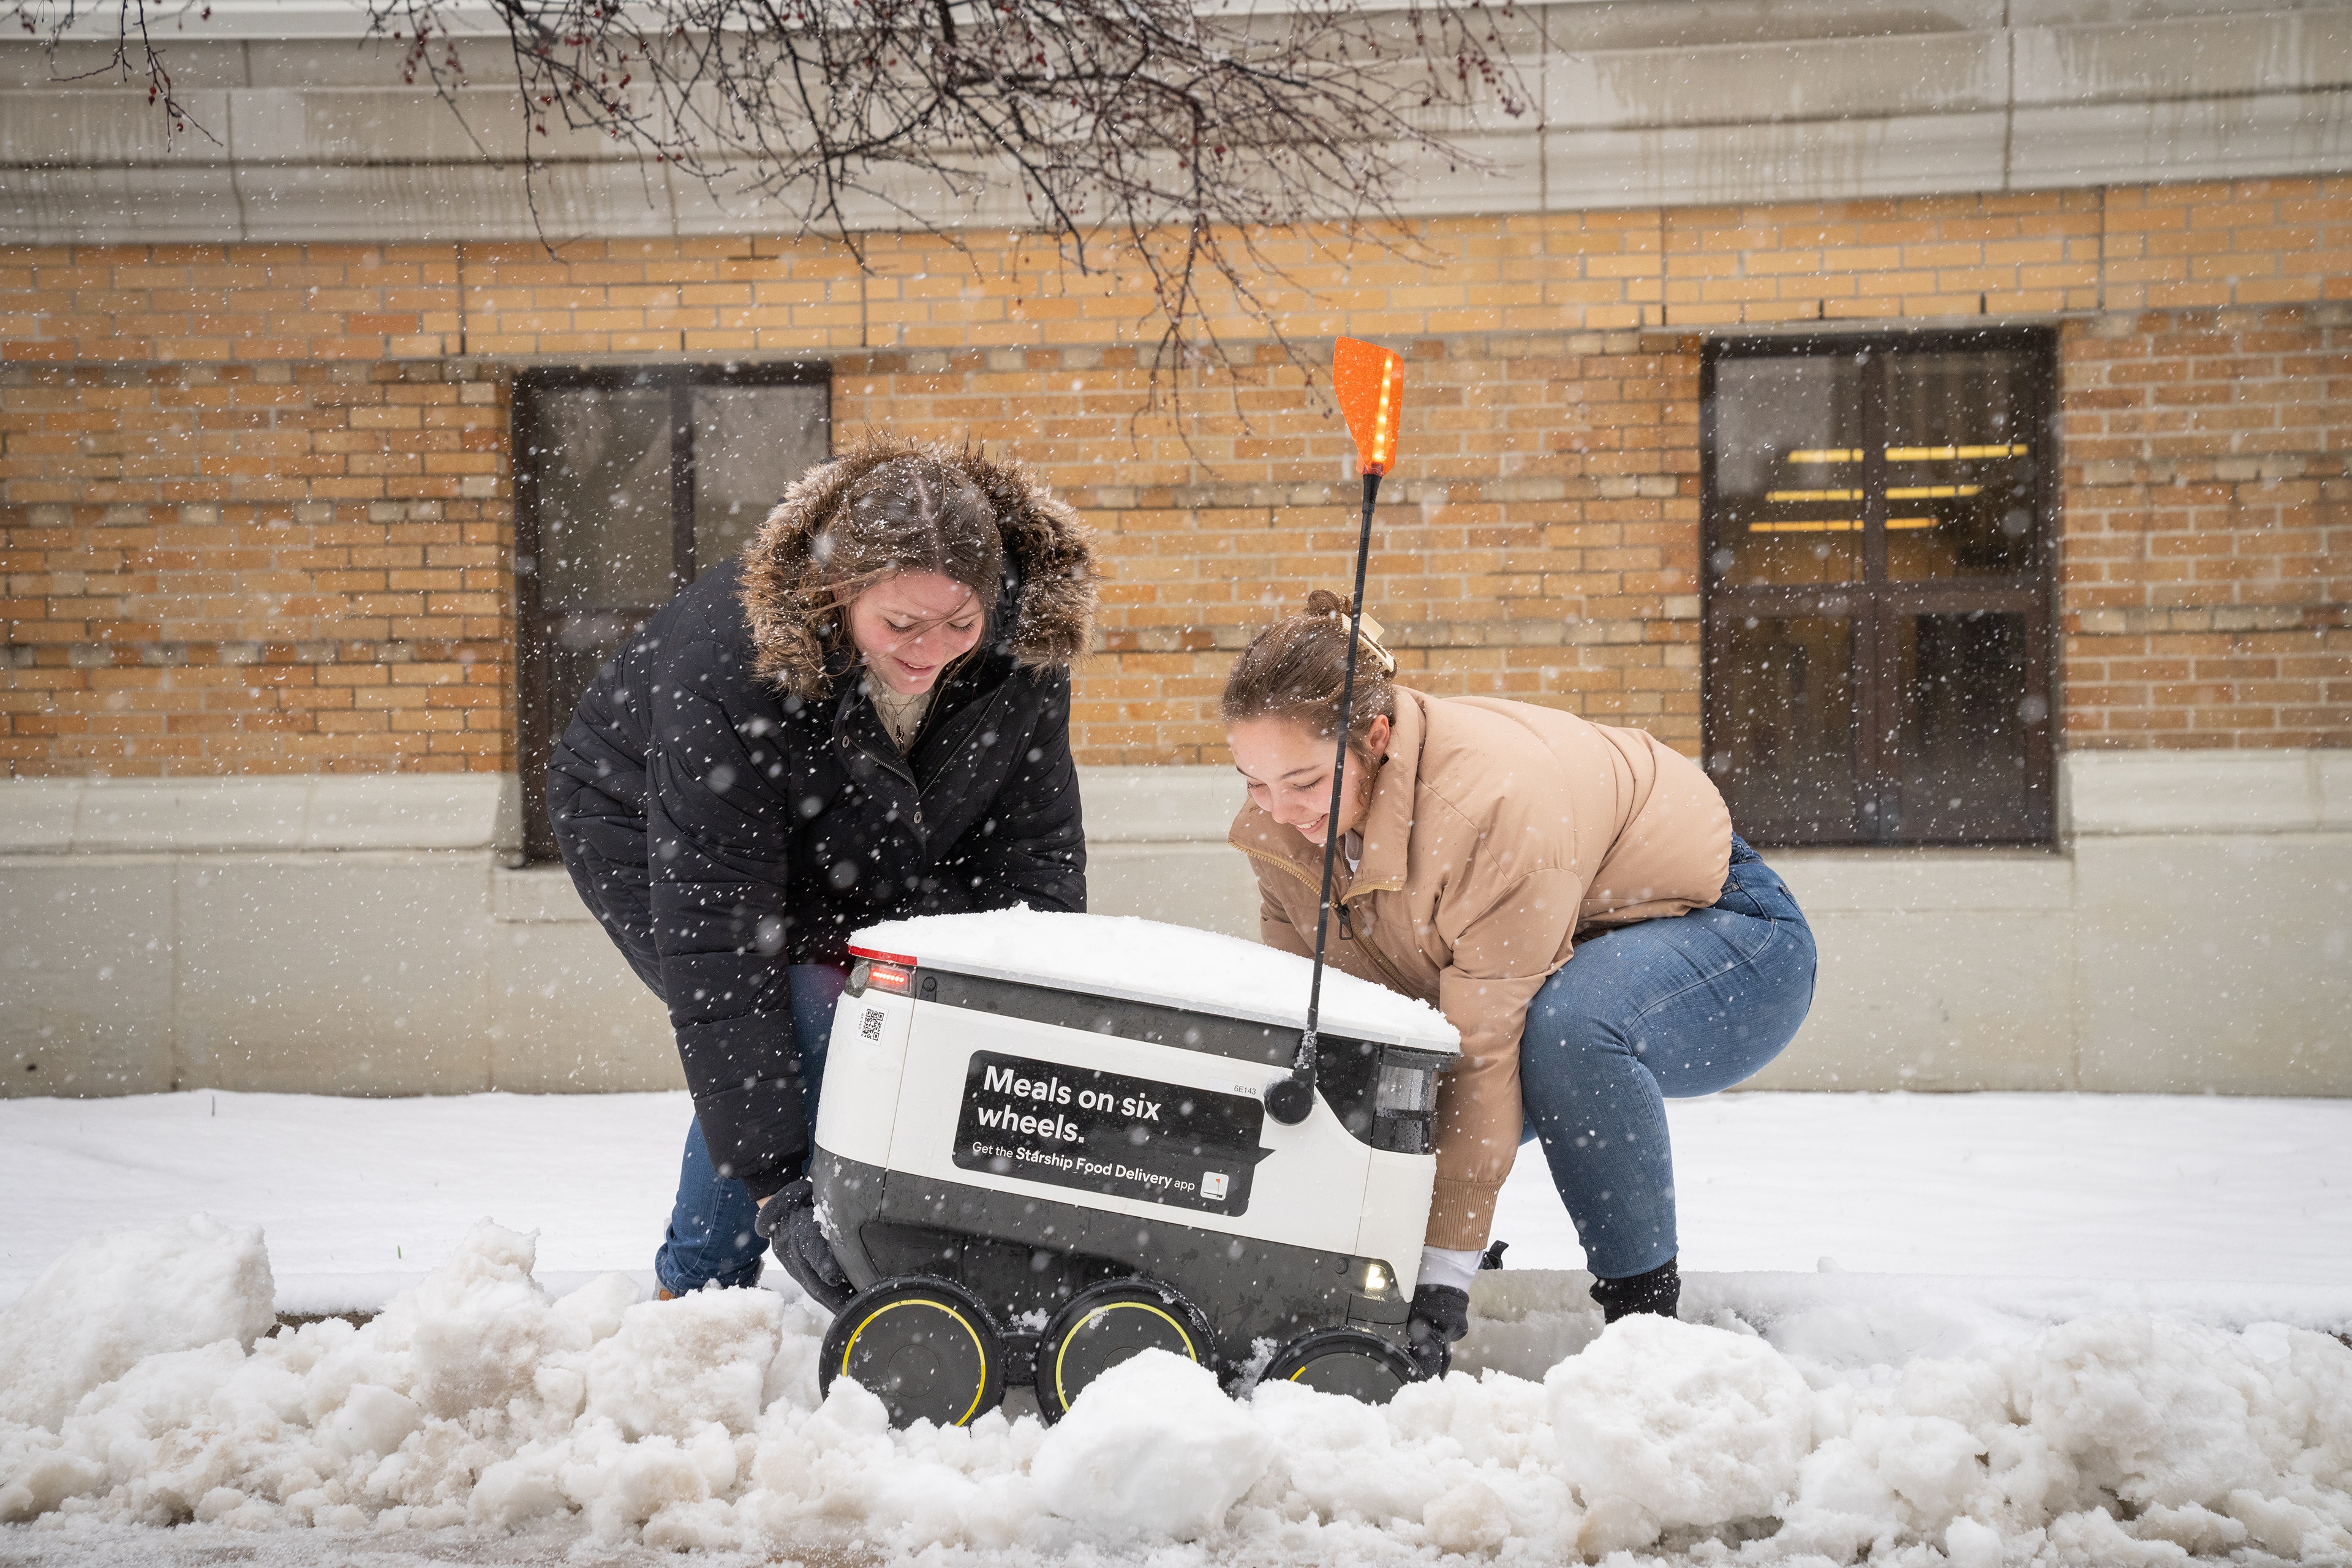 Students help a Starship robot out of the snow